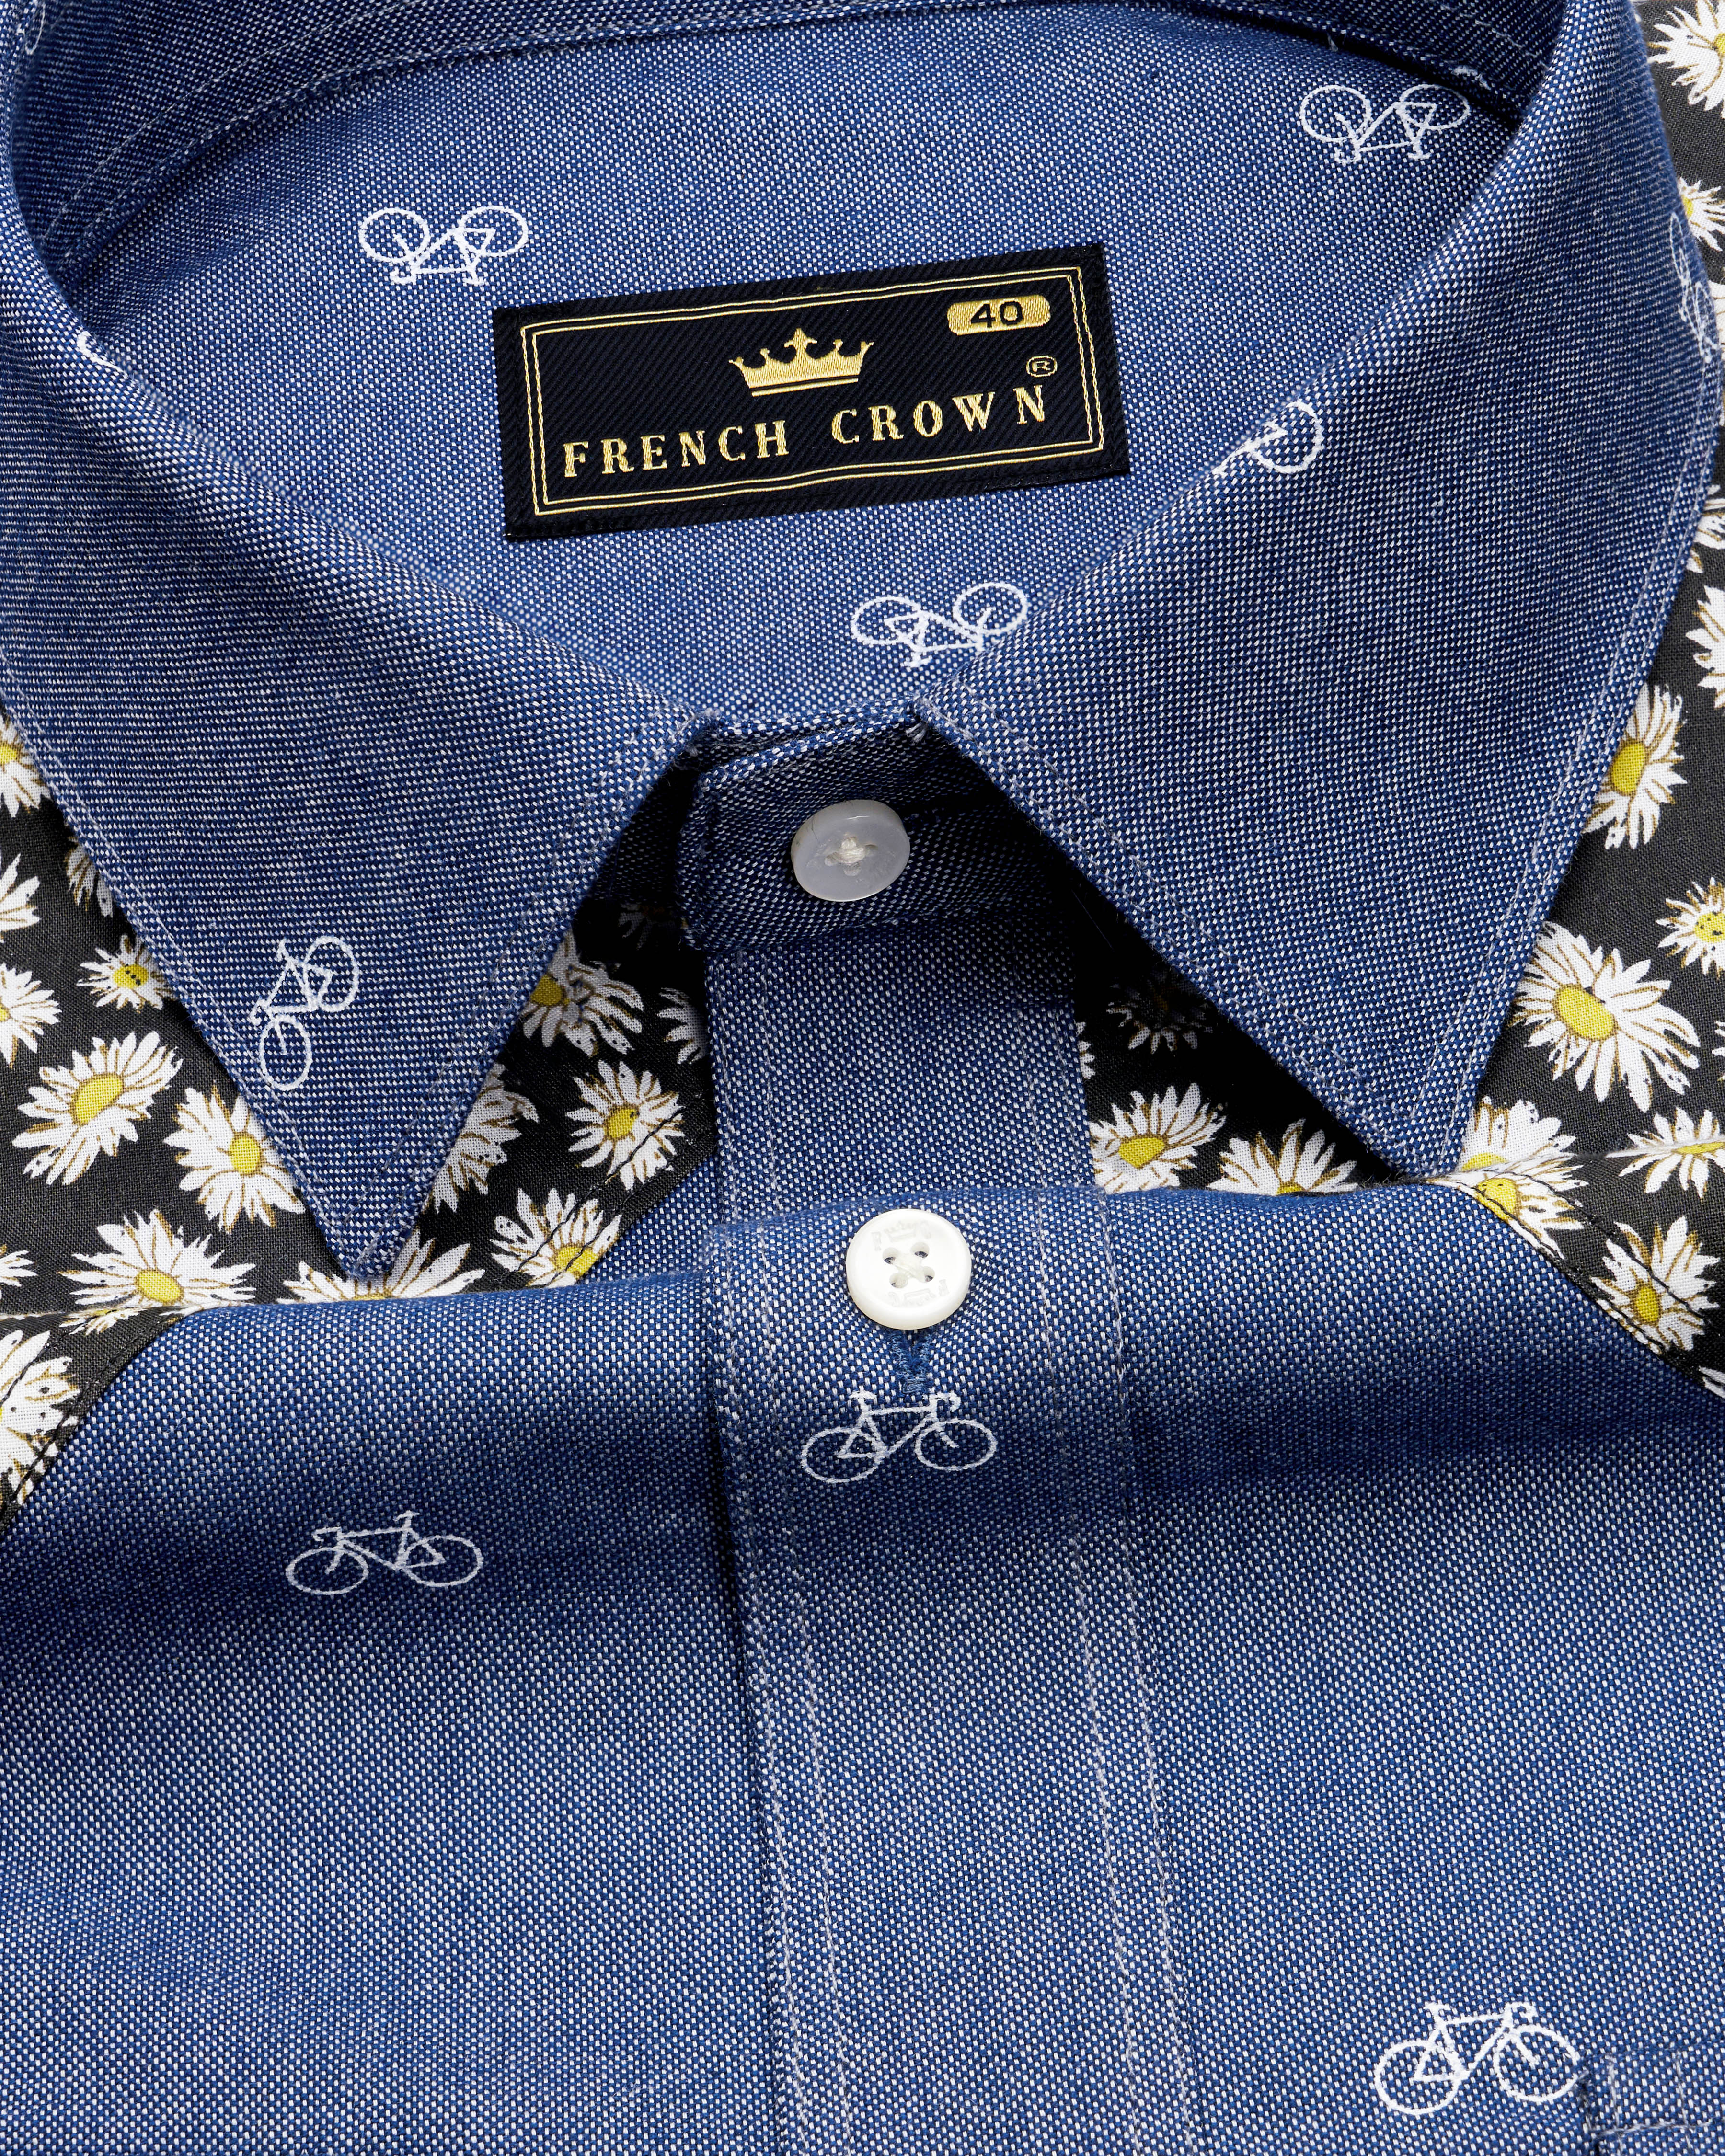 Twilight Blue with Bicycle and Ditsy Textured Royal Oxford Designer Shirt 9706-FP-P366-38, 9706-FP-P366-H-38, 9706-FP-P366-39, 9706-FP-P366-H-39, 9706-FP-P366-40, 9706-FP-P366-H-40, 9706-FP-P366-42, 9706-FP-P366-H-42, 9706-FP-P366-44, 9706-FP-P366-H-44, 9706-FP-P366-46, 9706-FP-P366-H-46, 9706-FP-P366-48, 9706-FP-P366-H-48, 9706-FP-P366-50, 9706-FP-P366-H-50, 9706-FP-P366-52, 9706-FP-P366-H-52